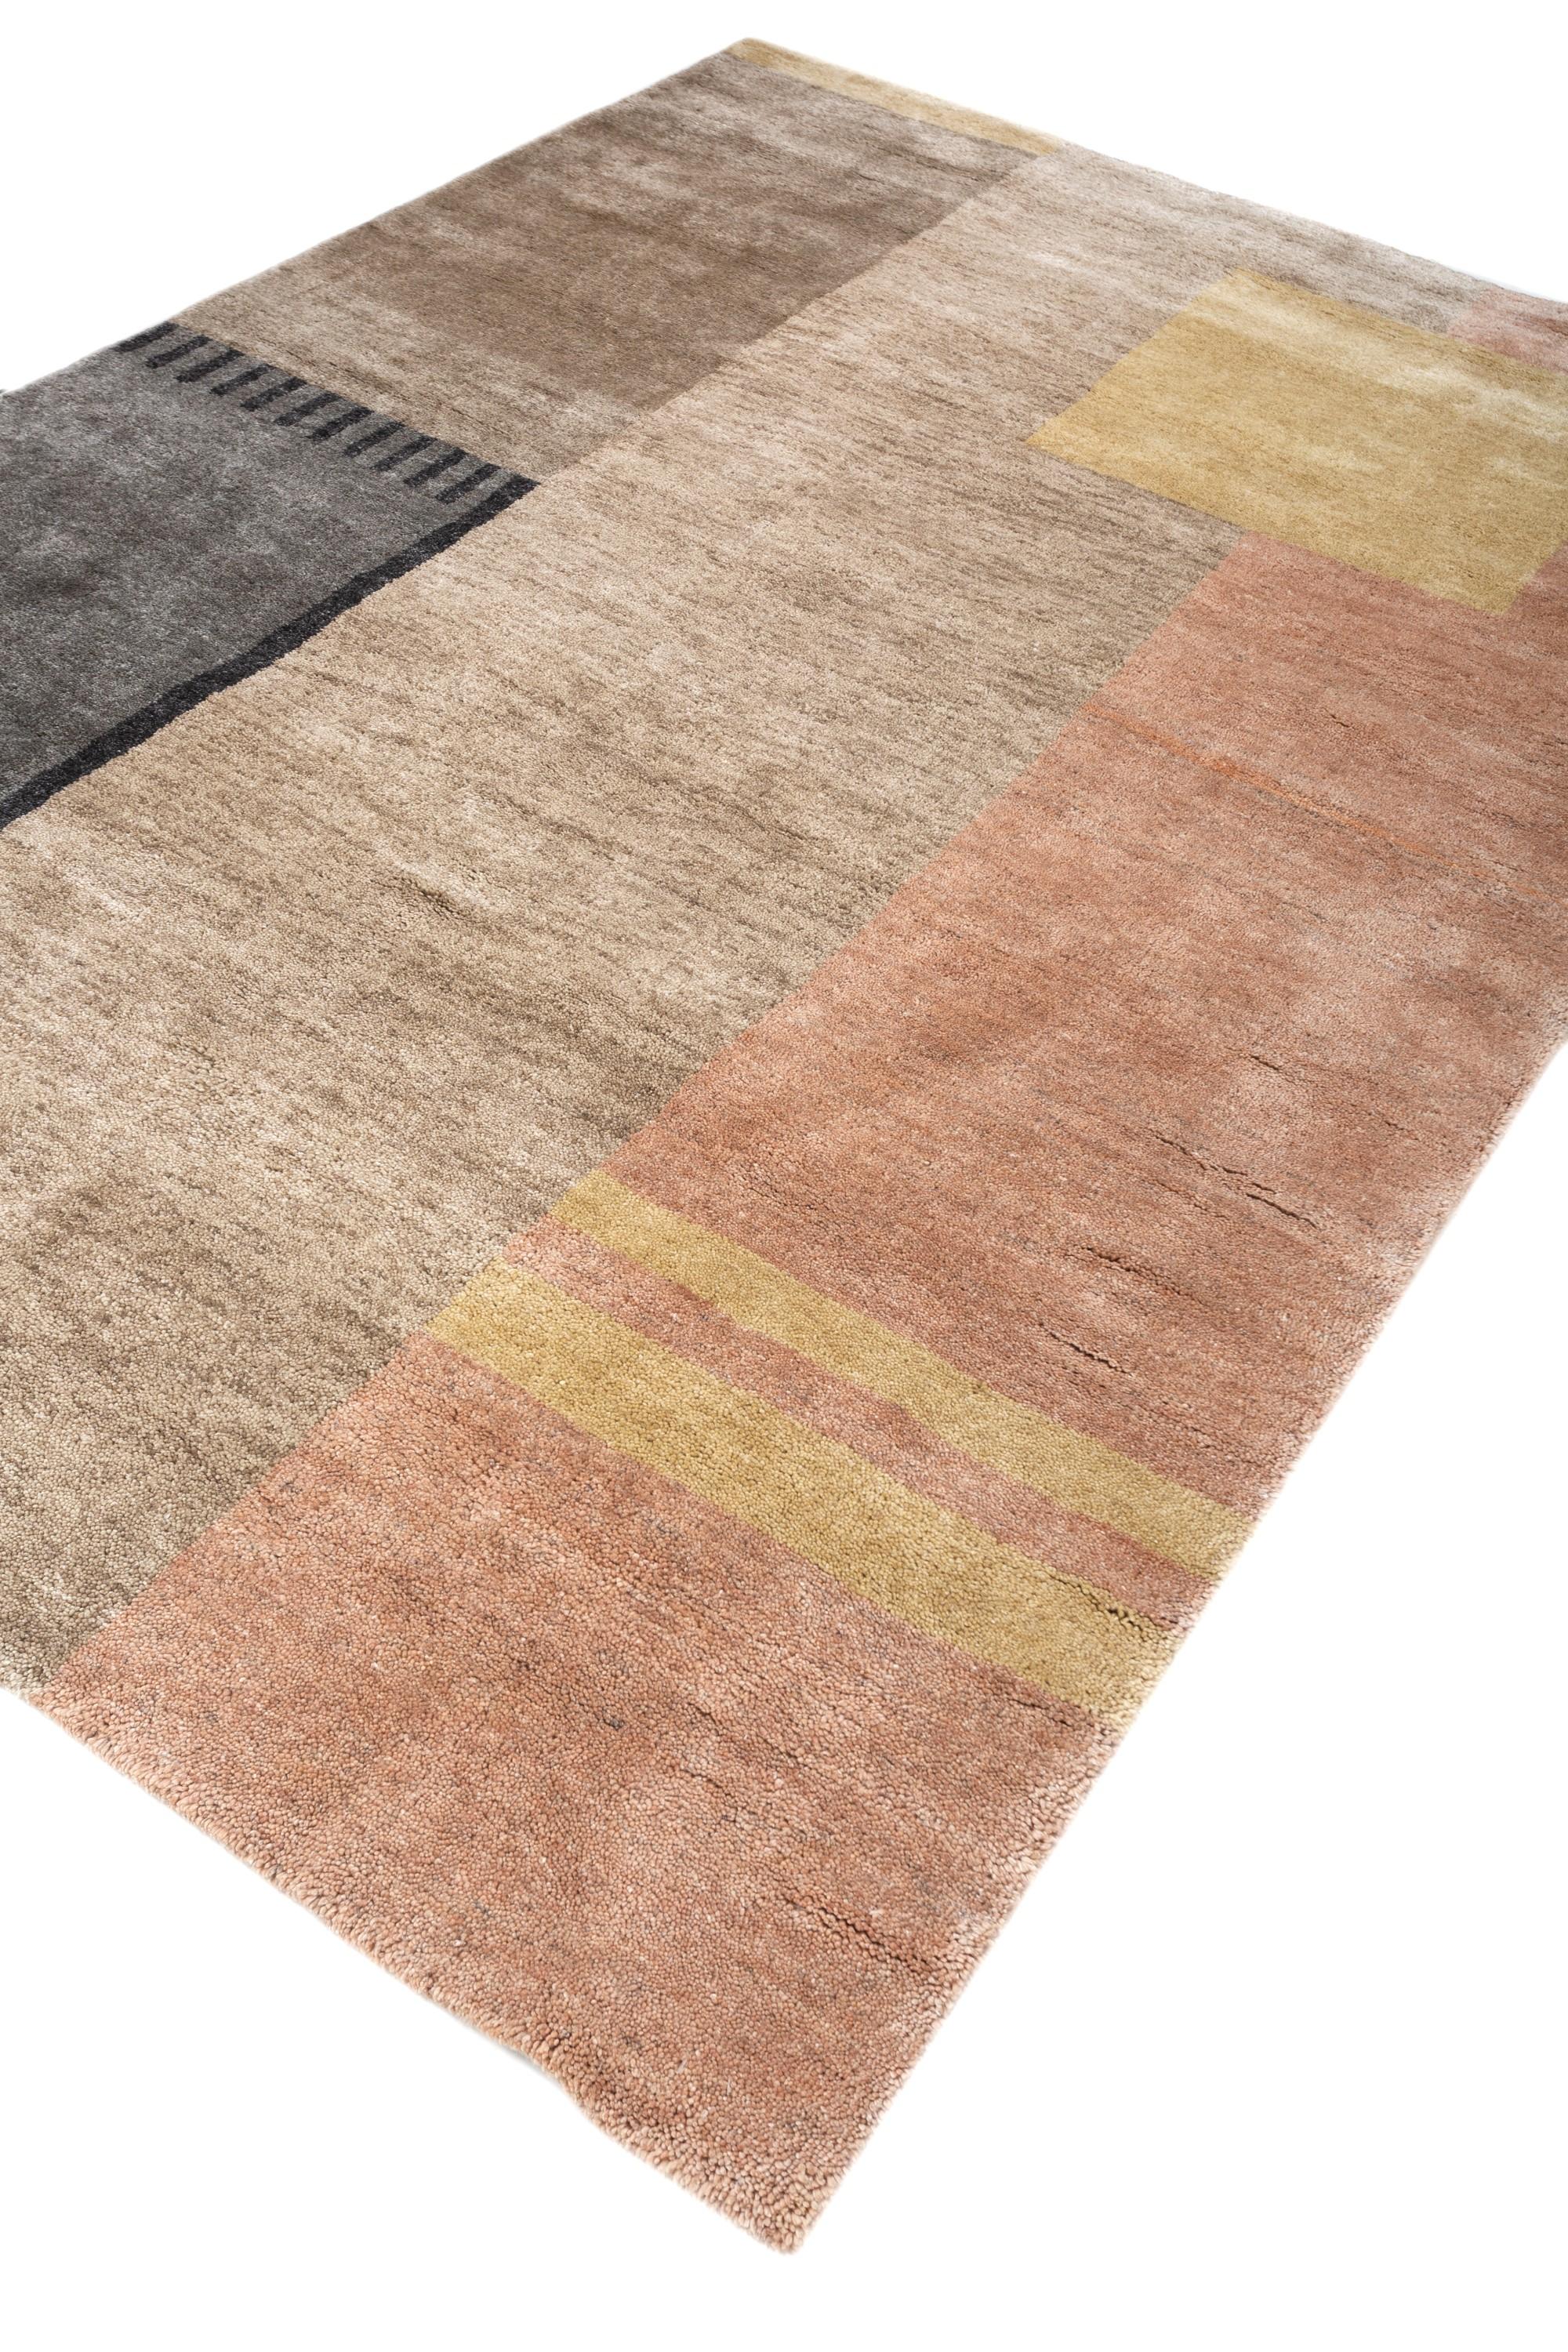 Modern Urbane Loomscape Classic Beige & Apricot 180X270 cm Handknotted Rug For Sale